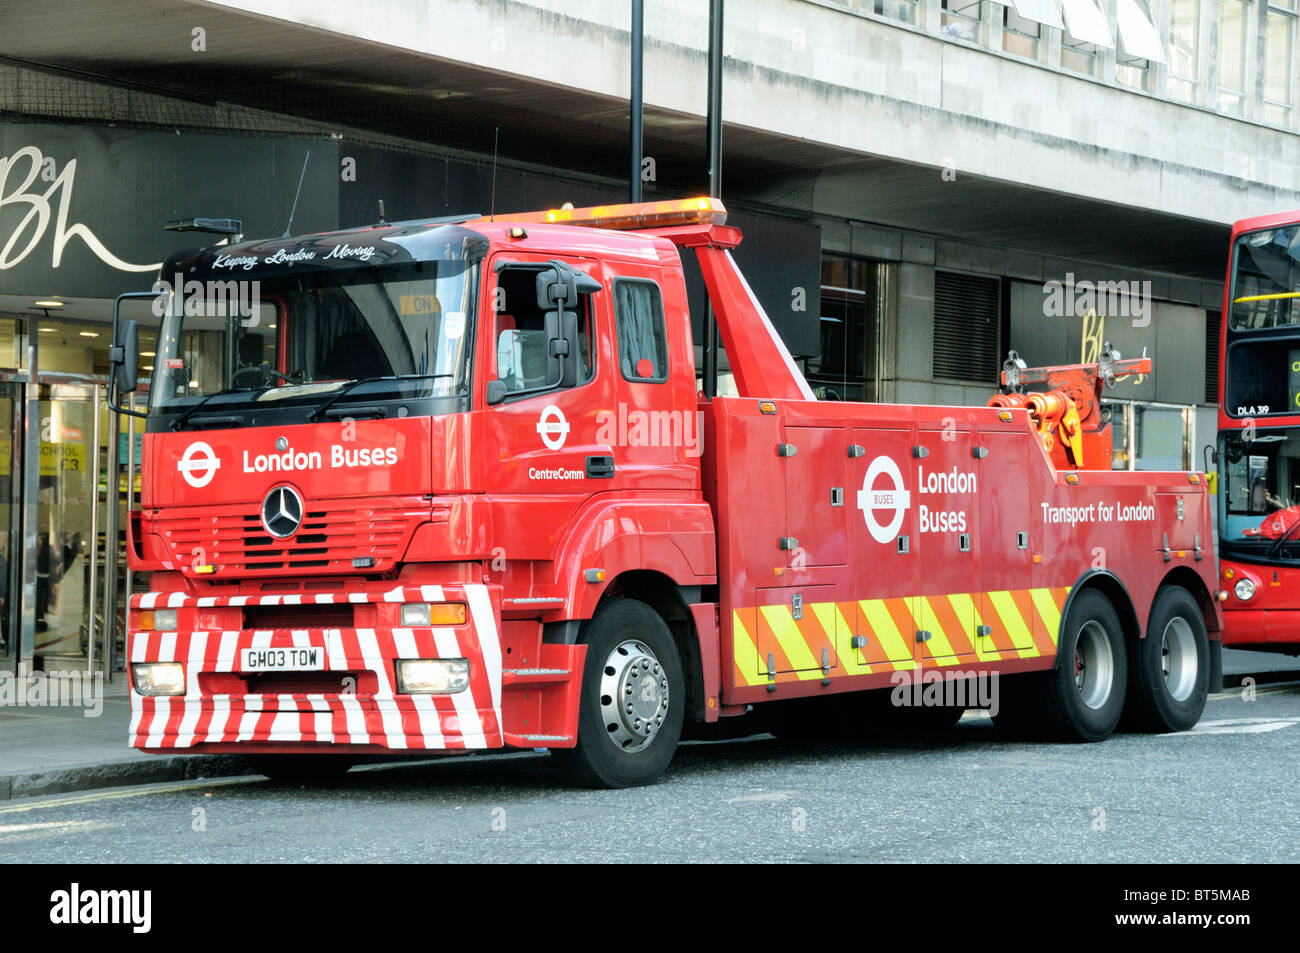 London Buses pick up truck Stock Photo